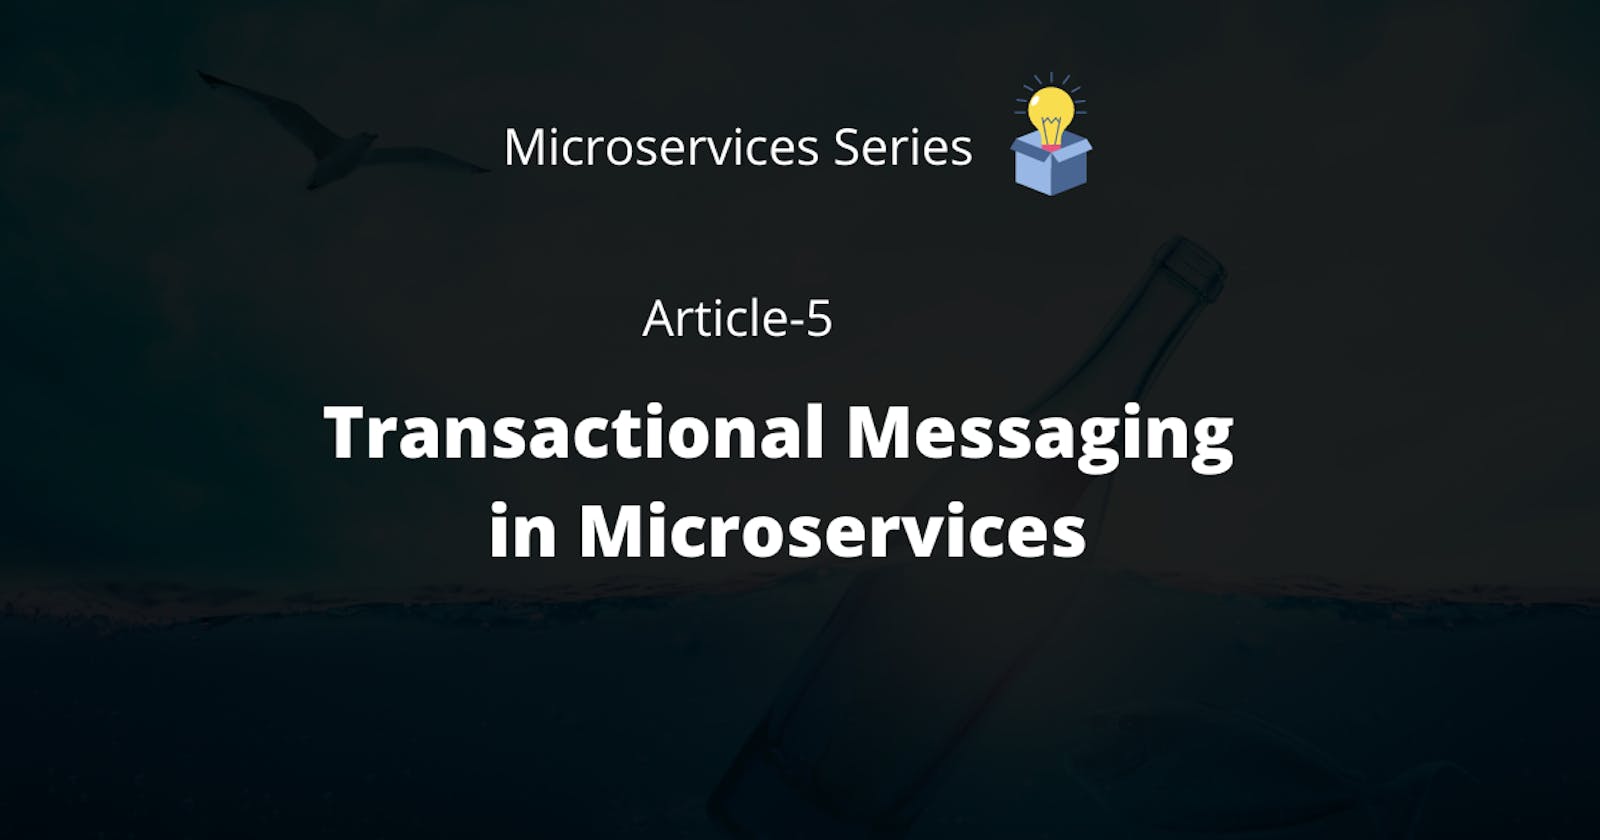 Transactional Messaging in Microservices